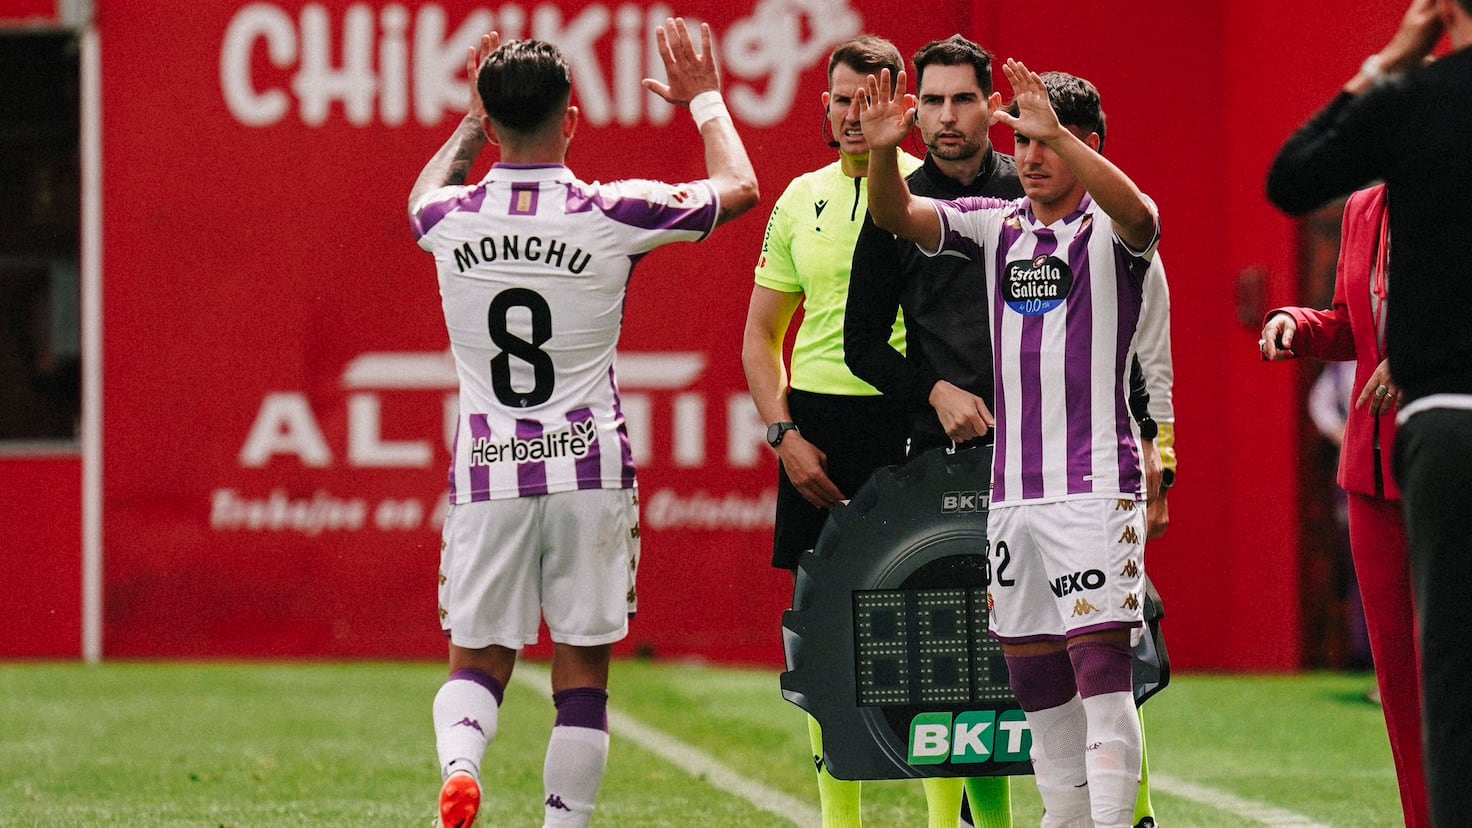 Dream Debut for Real Valladolid's Academy Star Jorge Iglesias in Anduva Triumph